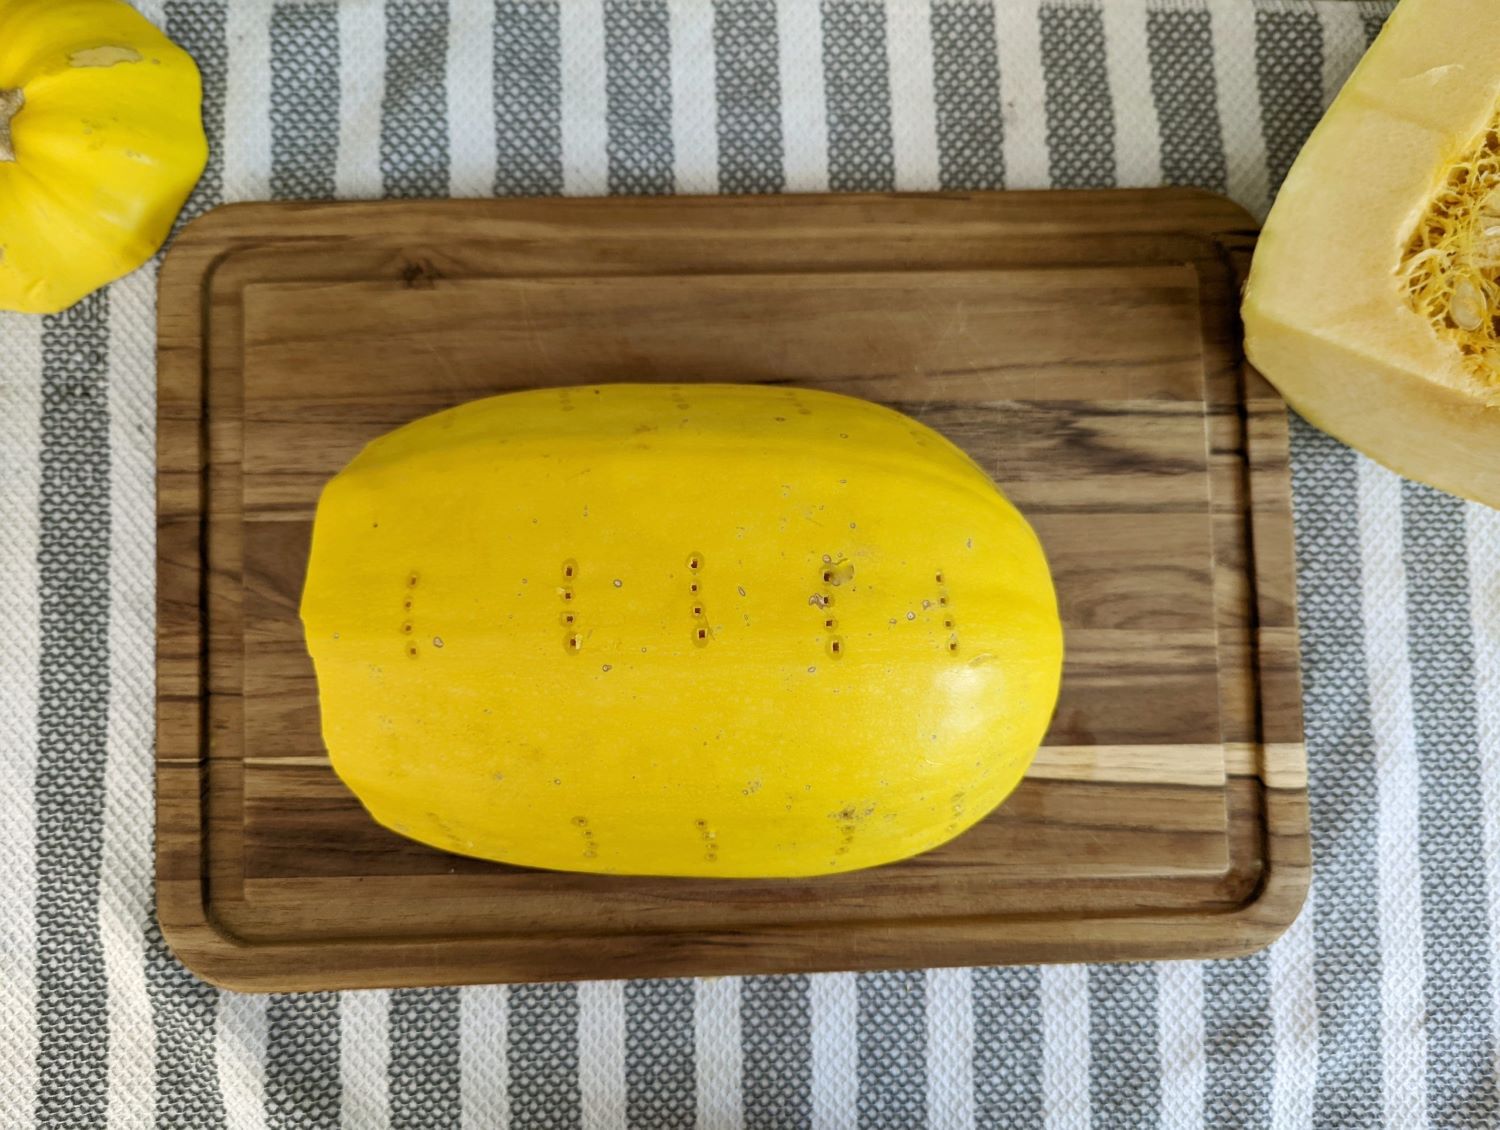 How To Cook Spaghetti Squash In Microwave Whole - Recipes.net